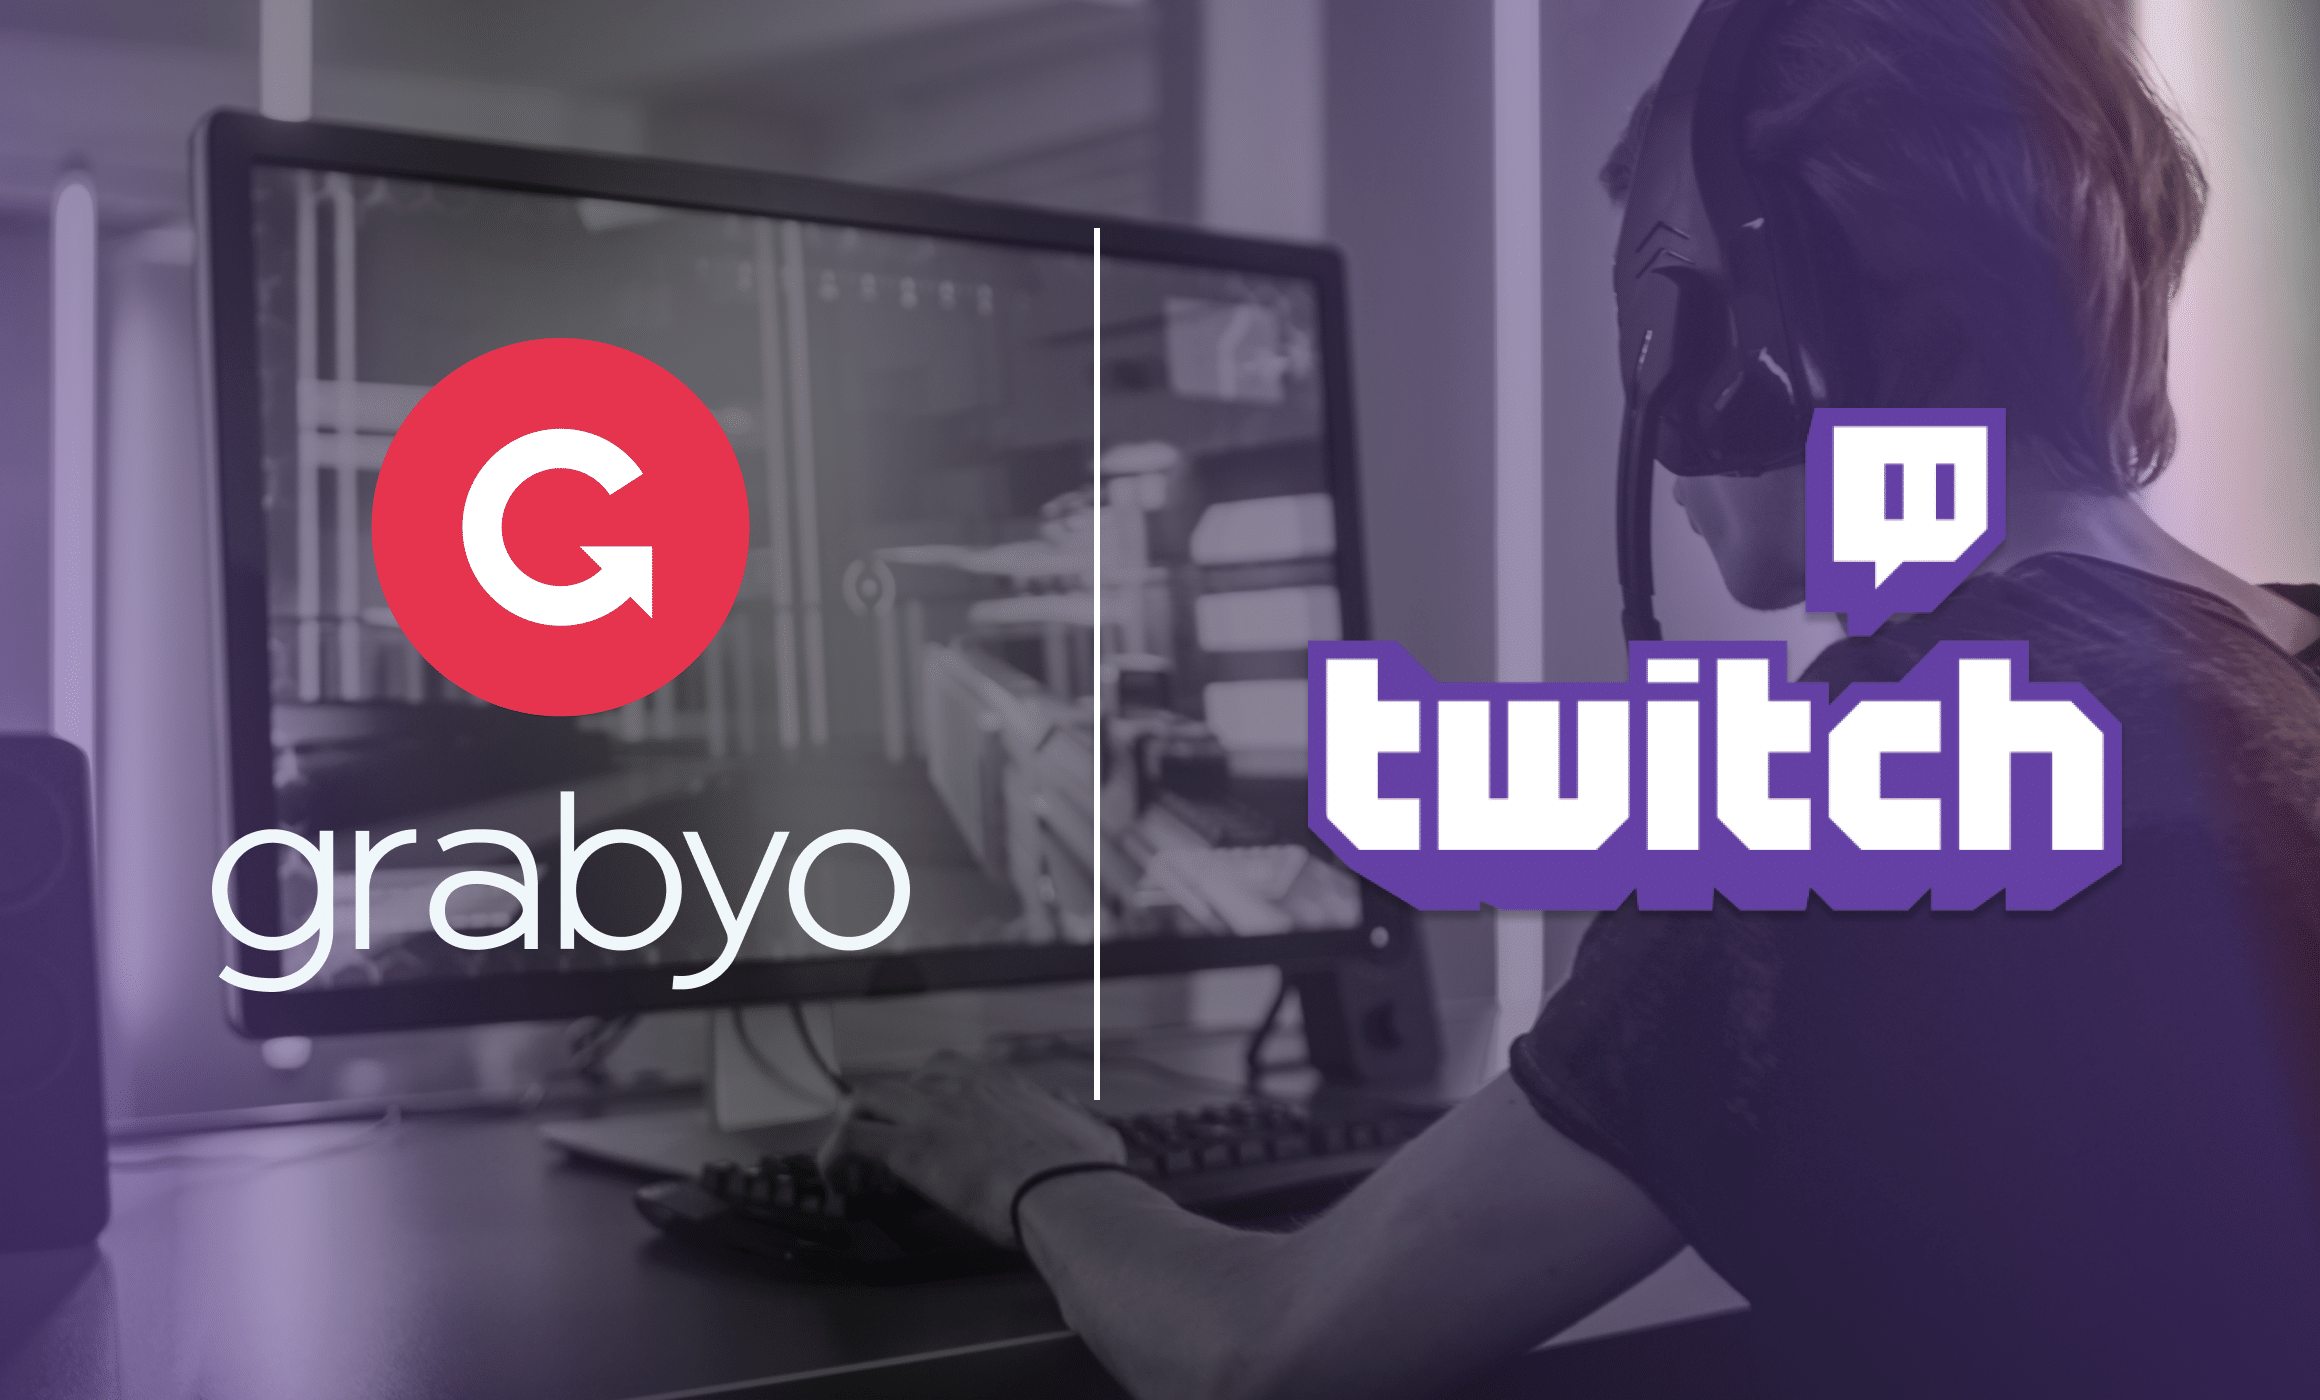 Grabyo adds direct Twitch integration for live broadcasting